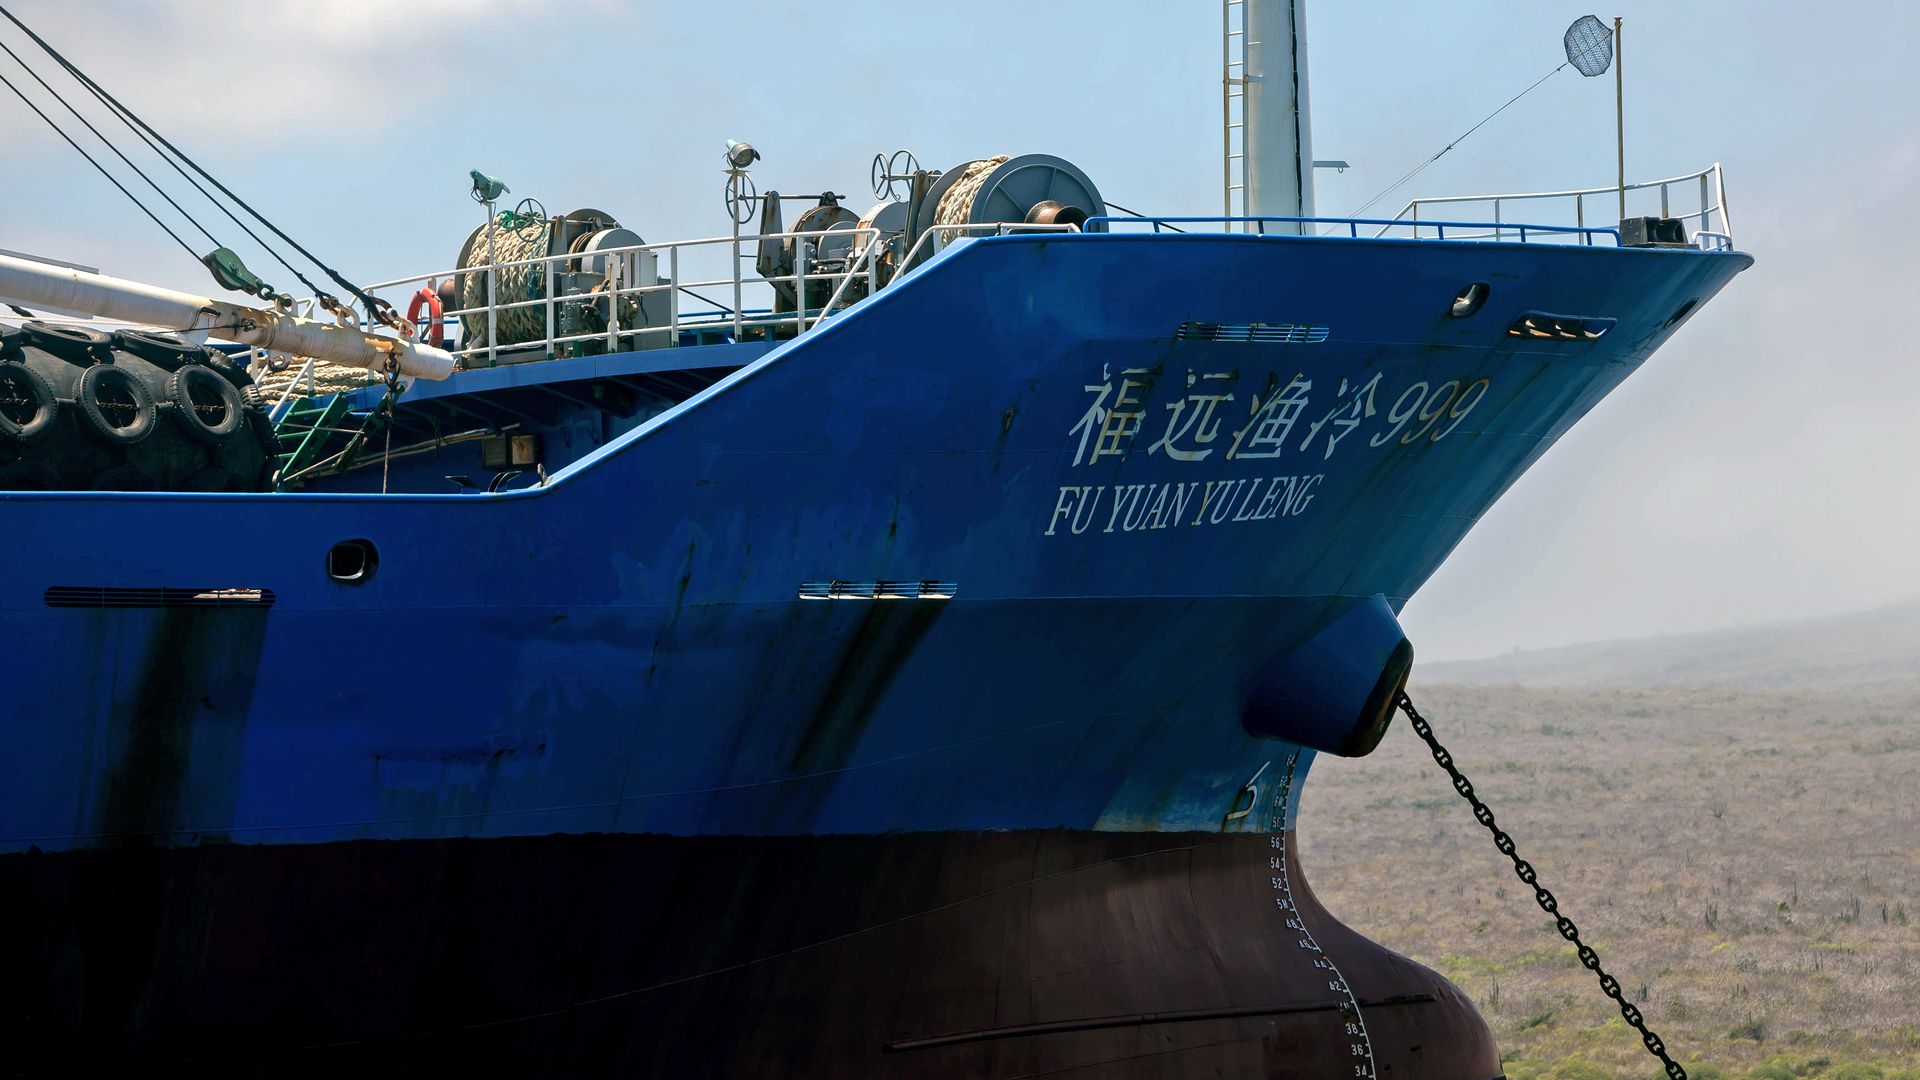 View of the Chinese-flagged ship confiscated by the Ecuadorean Navy in the waters of the Galapagos marine reserve